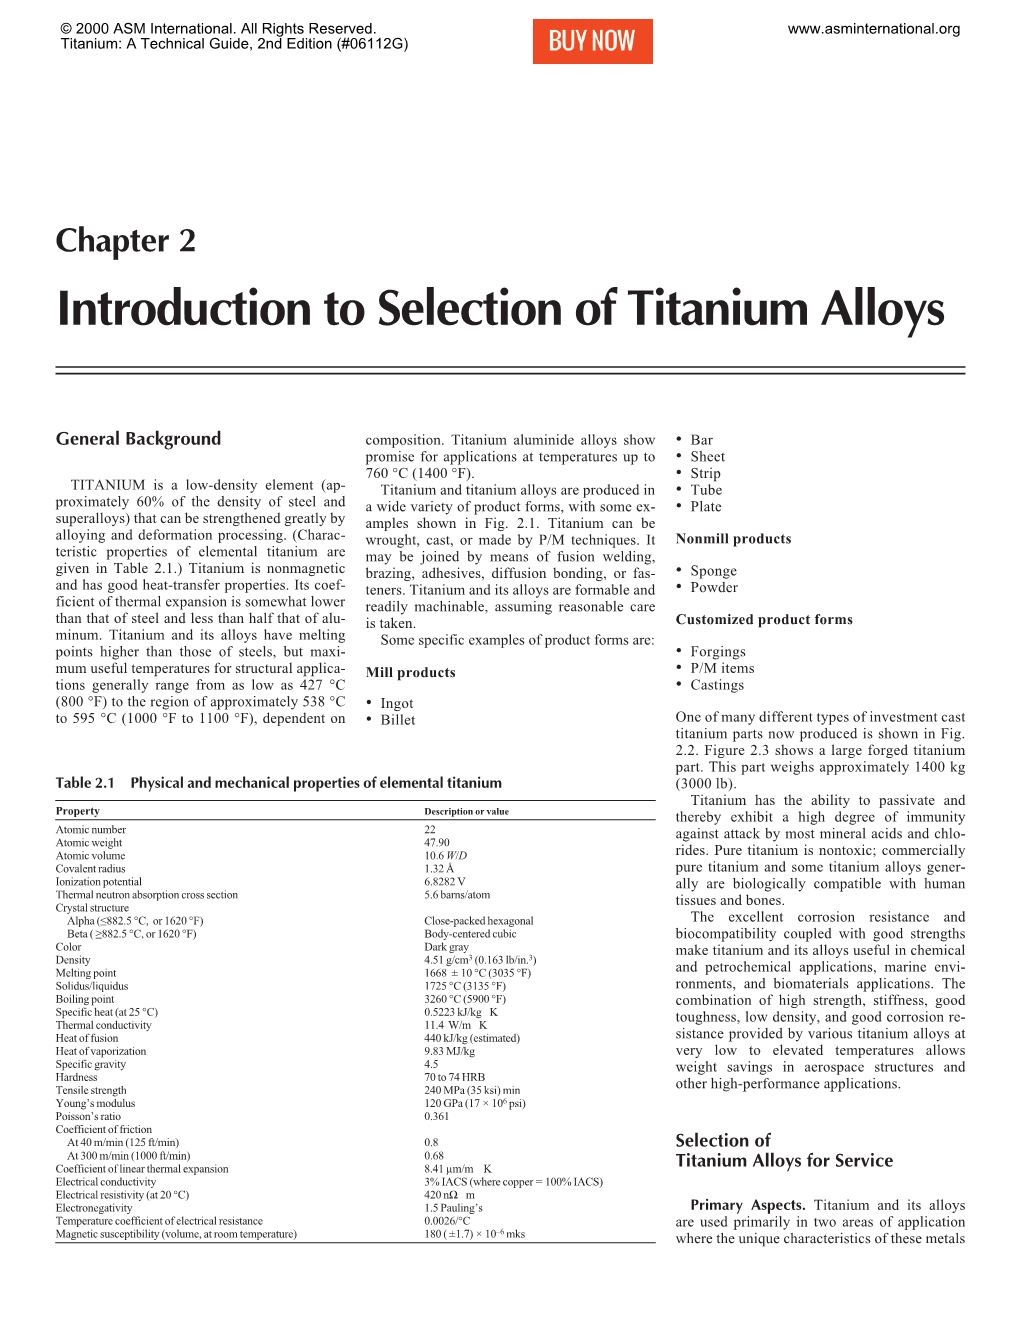 Introduction to Selection of Titanium Alloys